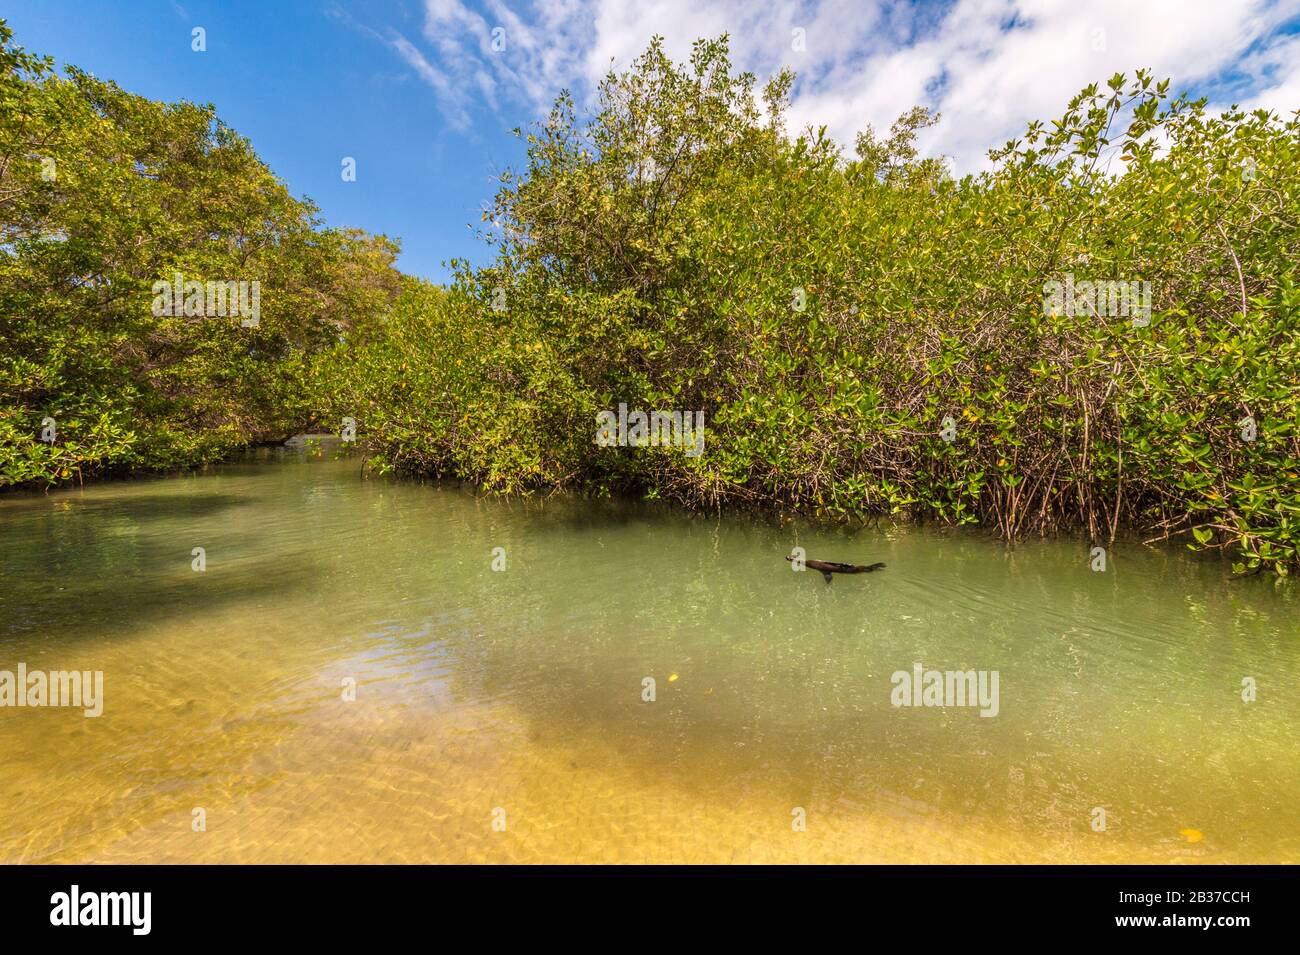 Ecuador, Galápagos Archipelago, listed as World Heritage by UNESCO, Isabela Island (Albemarie), Wetland Complex and Wall of Tears, Galápagos Sea Lion (Zalophus wollebaeki) endemic swimming in the mangrove Stock Photo